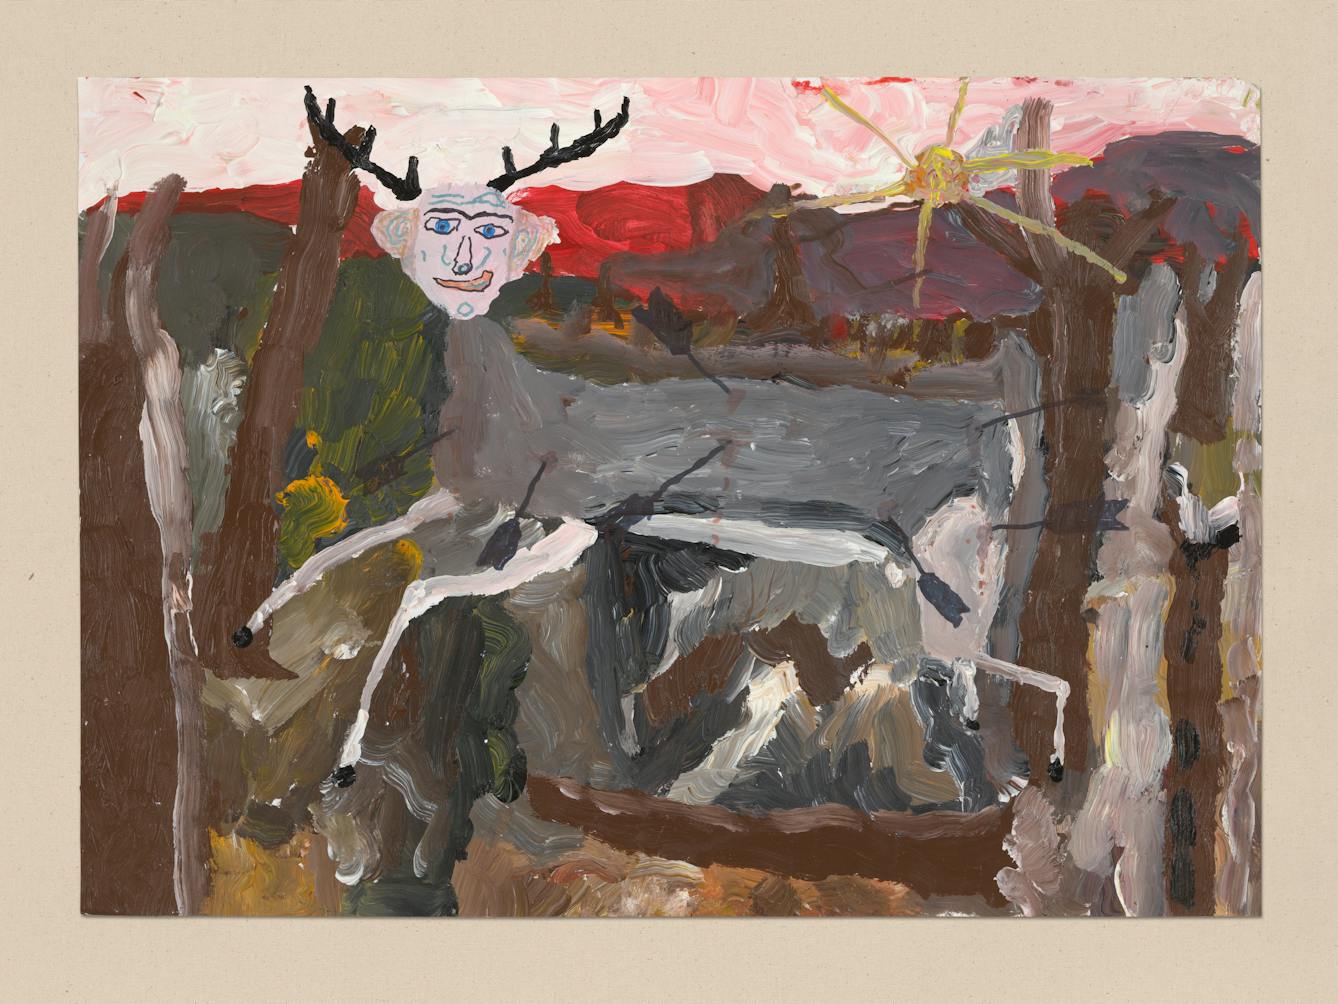 Acrylic on paper artwork by Chris Miller titled ‘Me as the wounded deer’. In the artwork a deer with a human head is galloping towards frame left. The surrounding scene appears to be a war torn landscape.